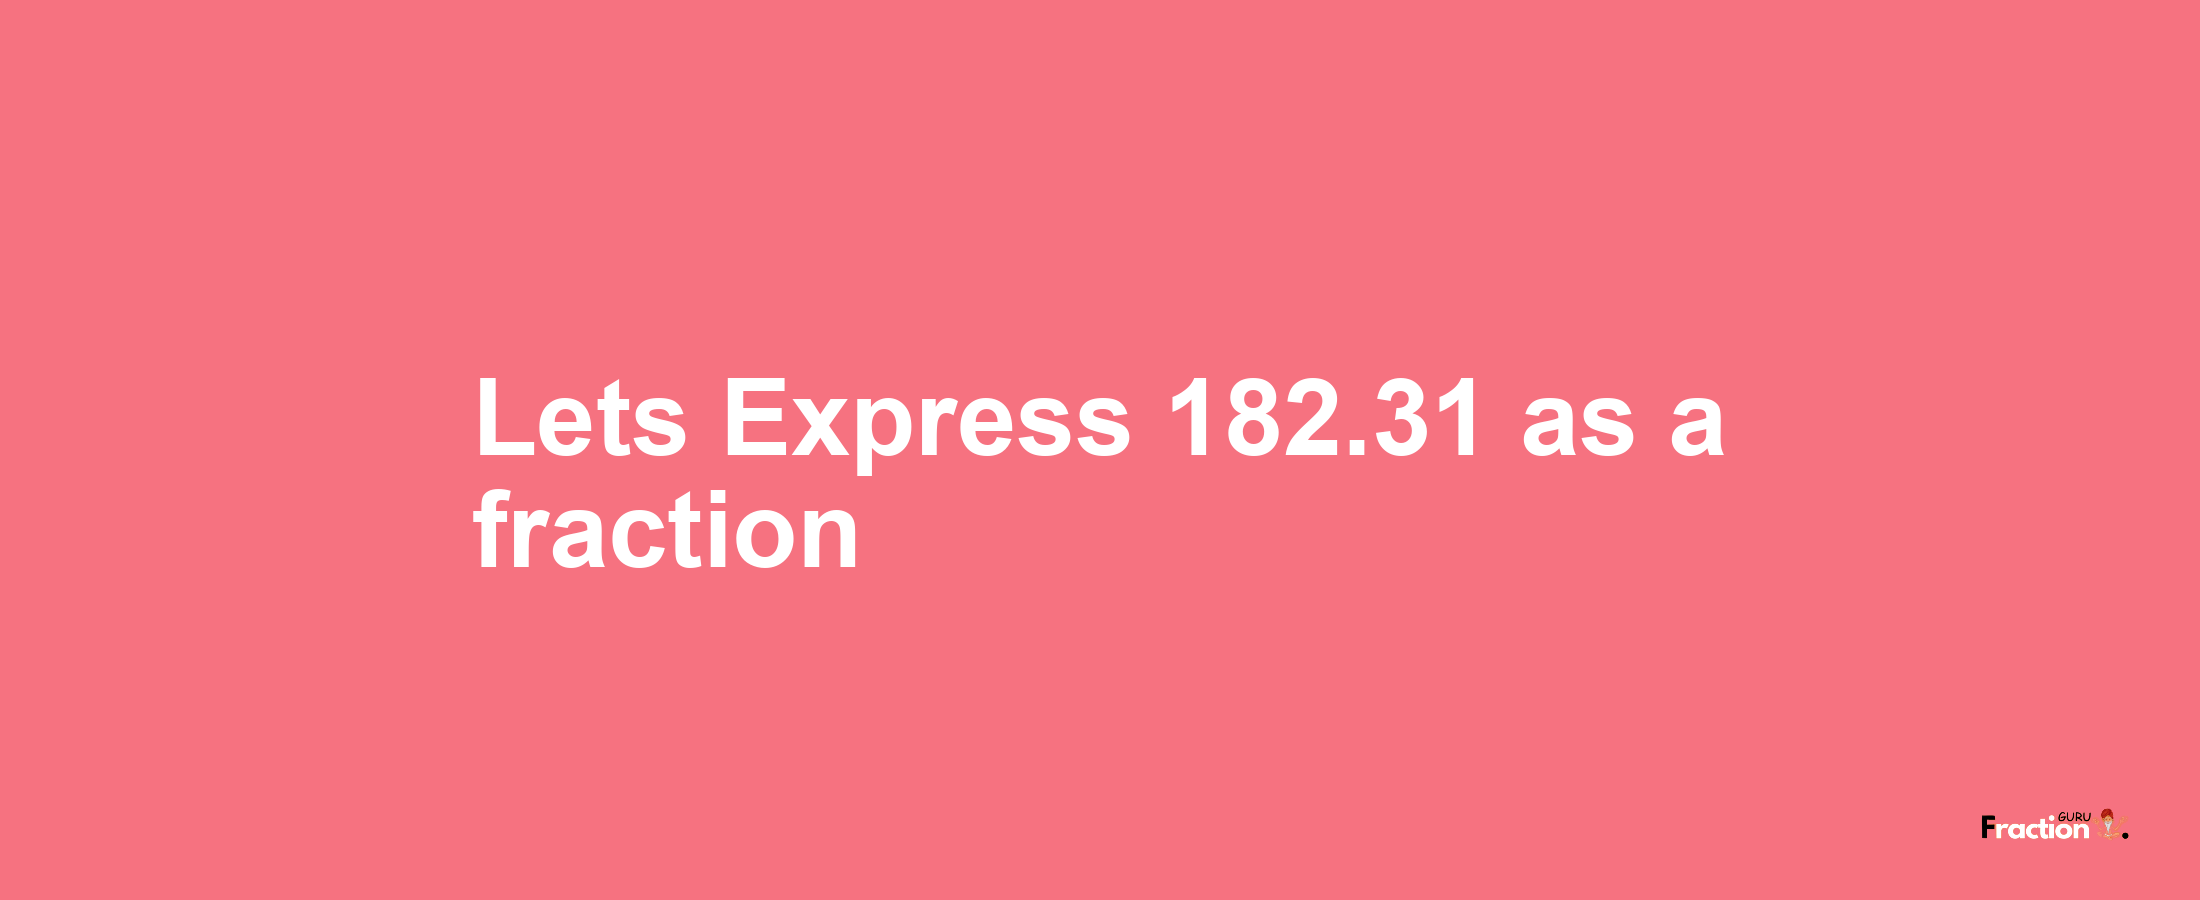 Lets Express 182.31 as afraction